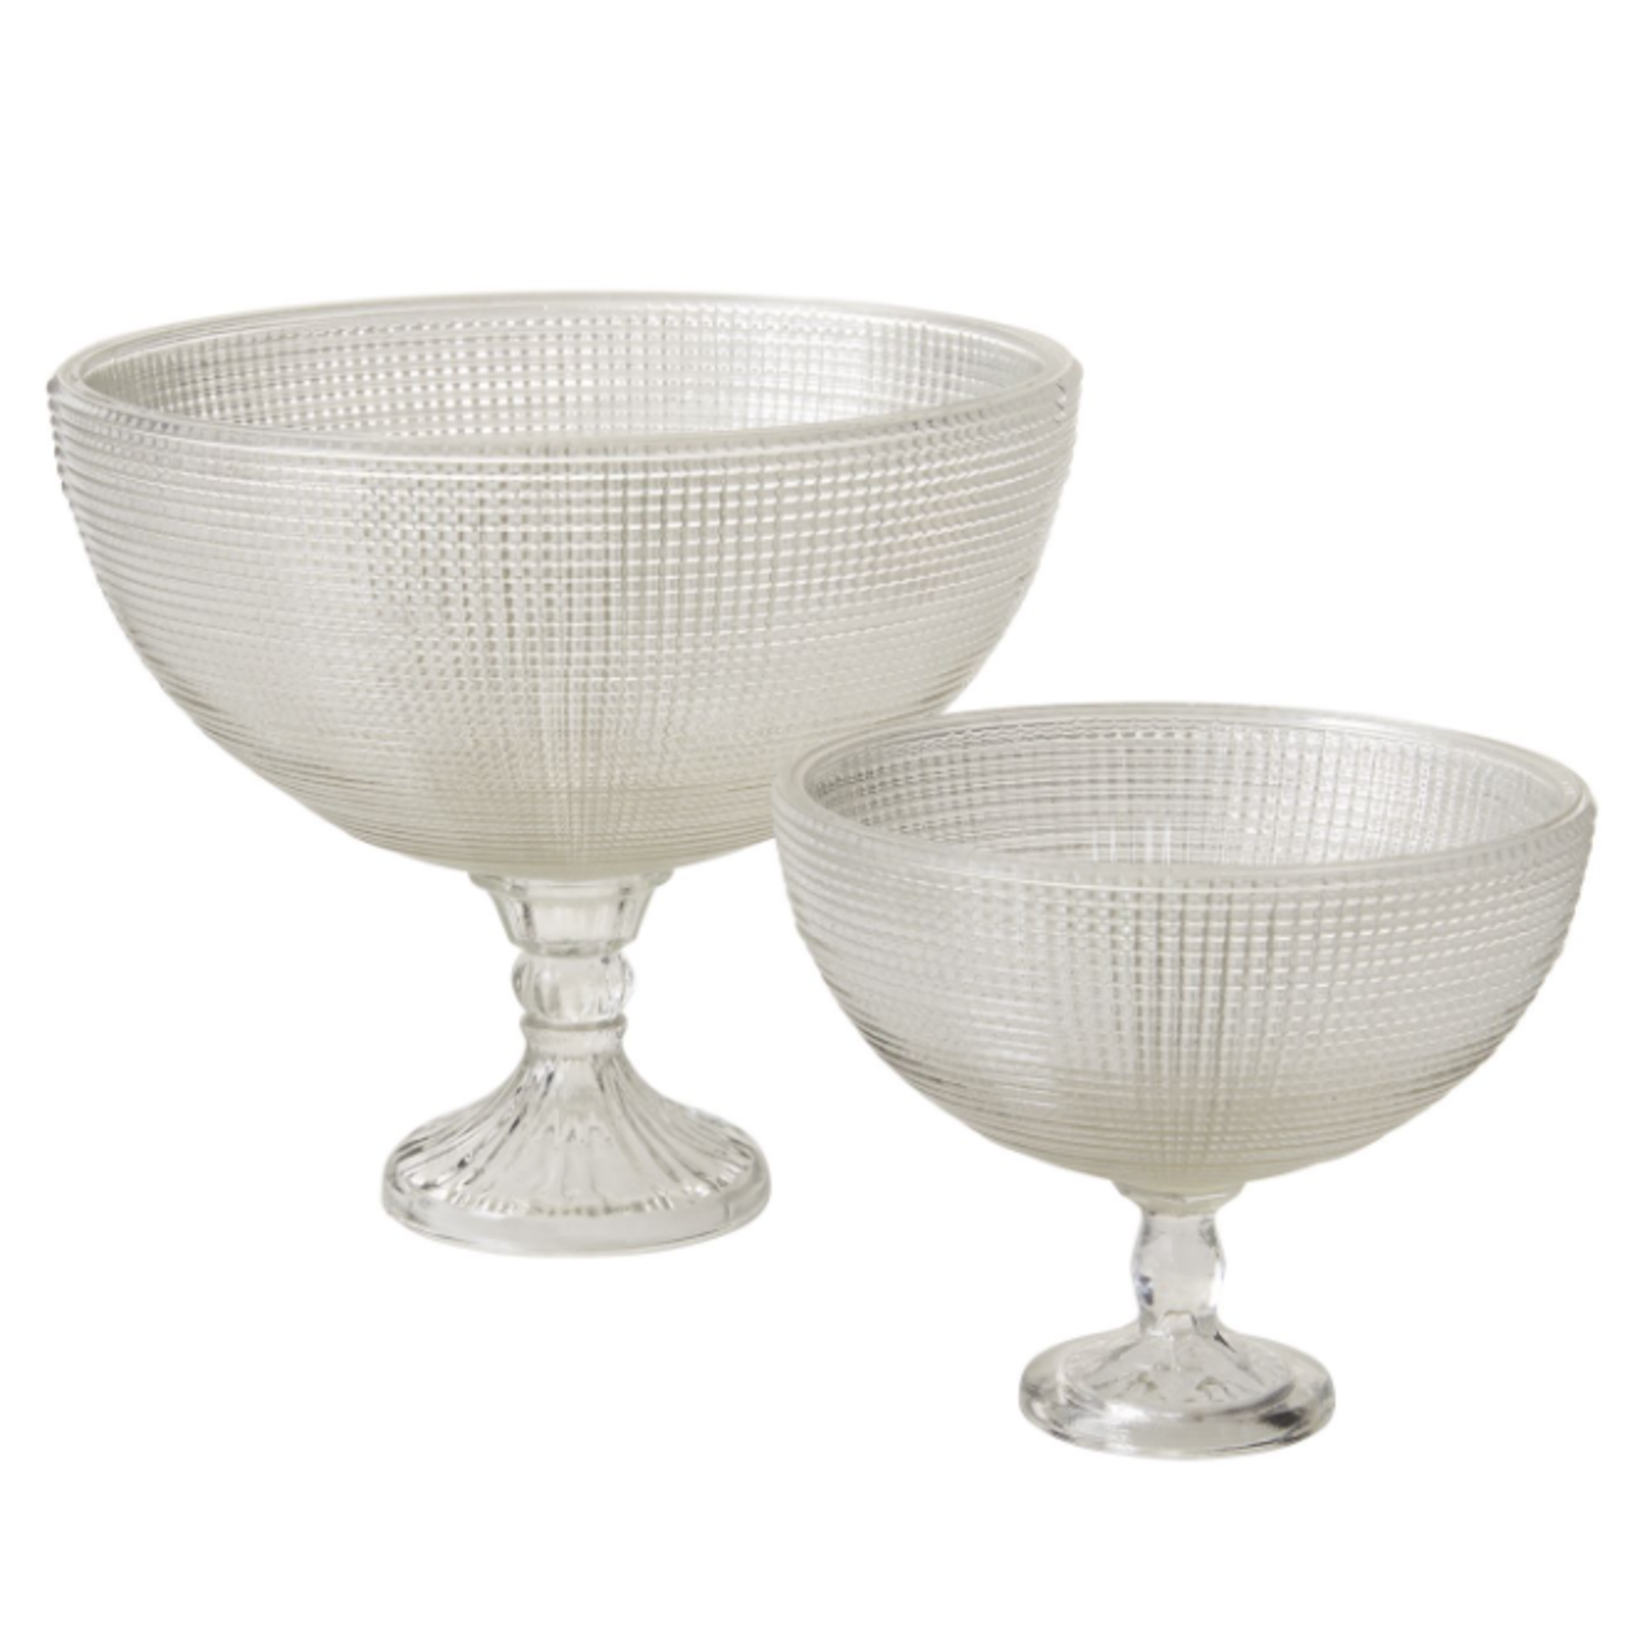 5"h x 6.25" OPULENT GLASS COMPOTE